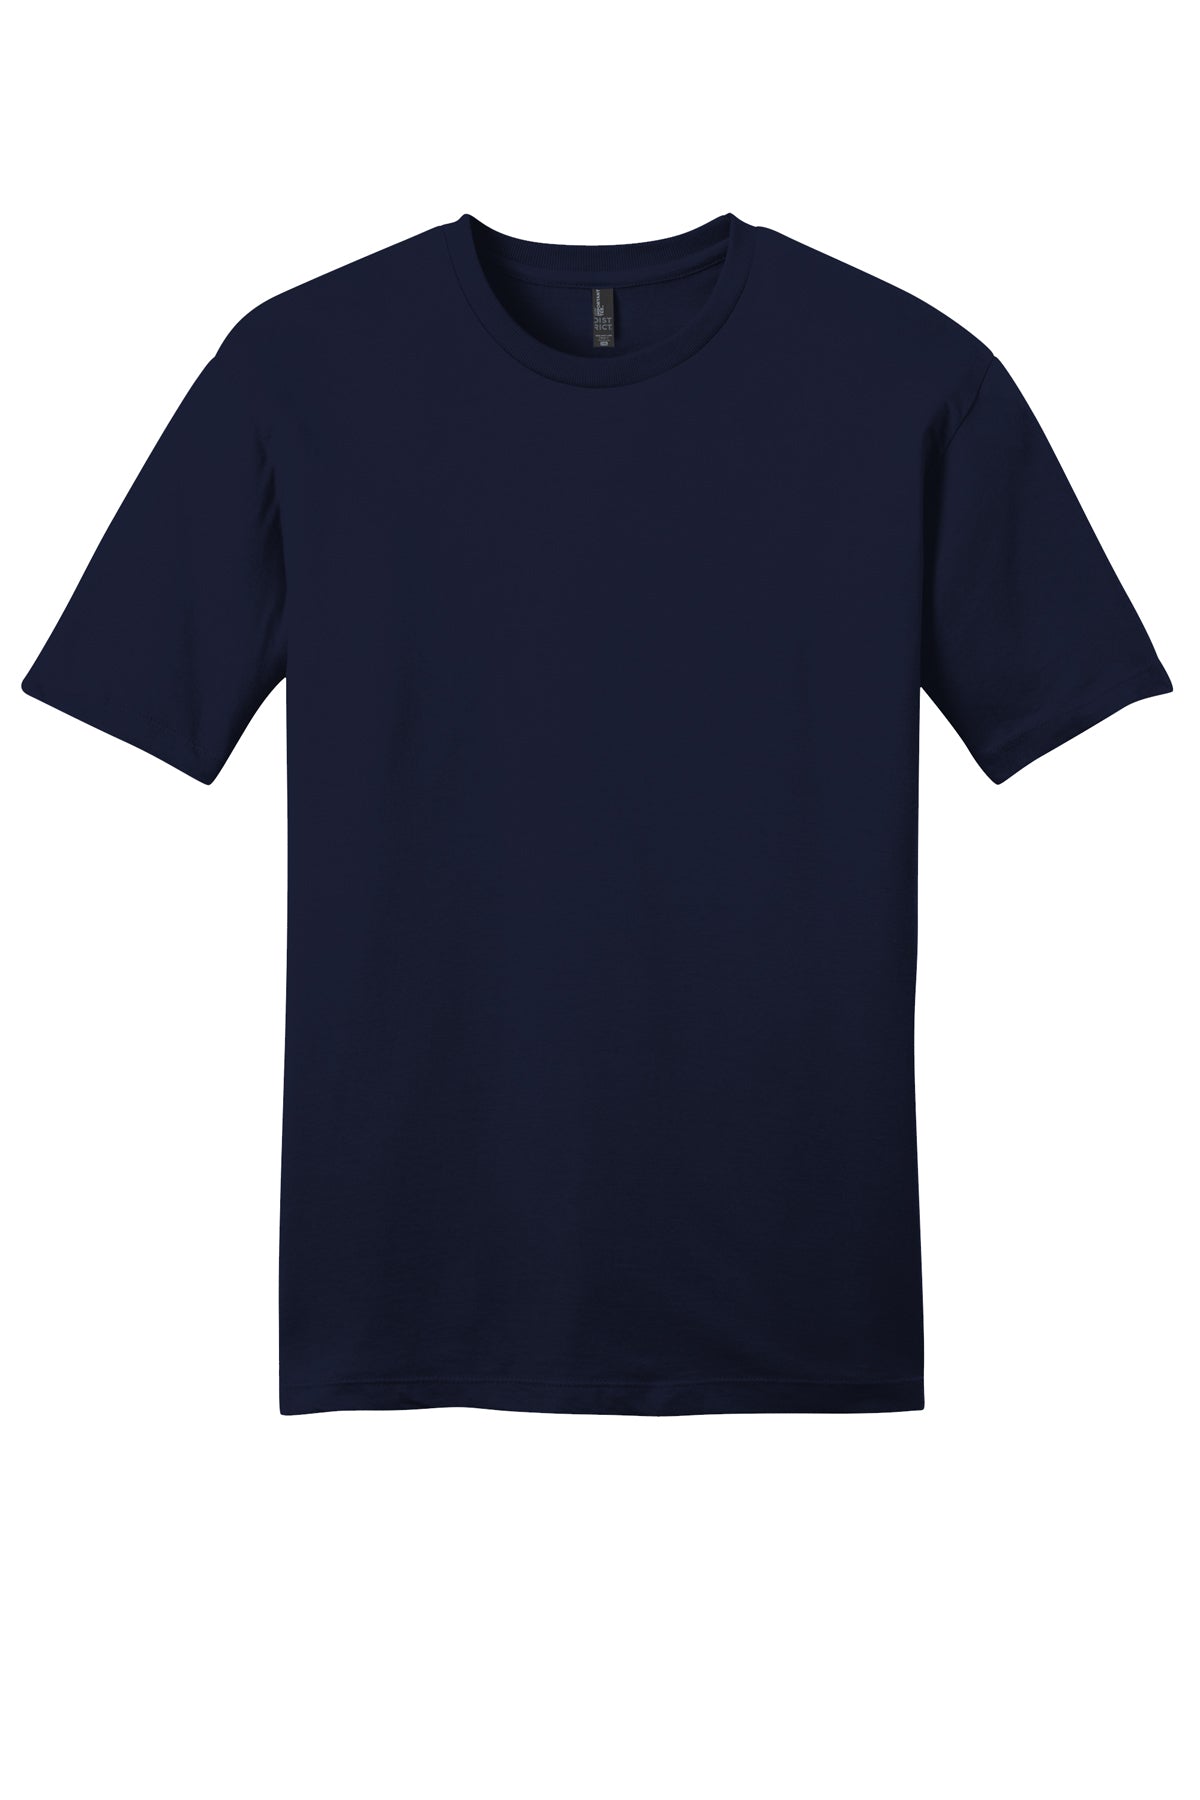 DT6000 District ® Very Important Tee ® XS-4XL